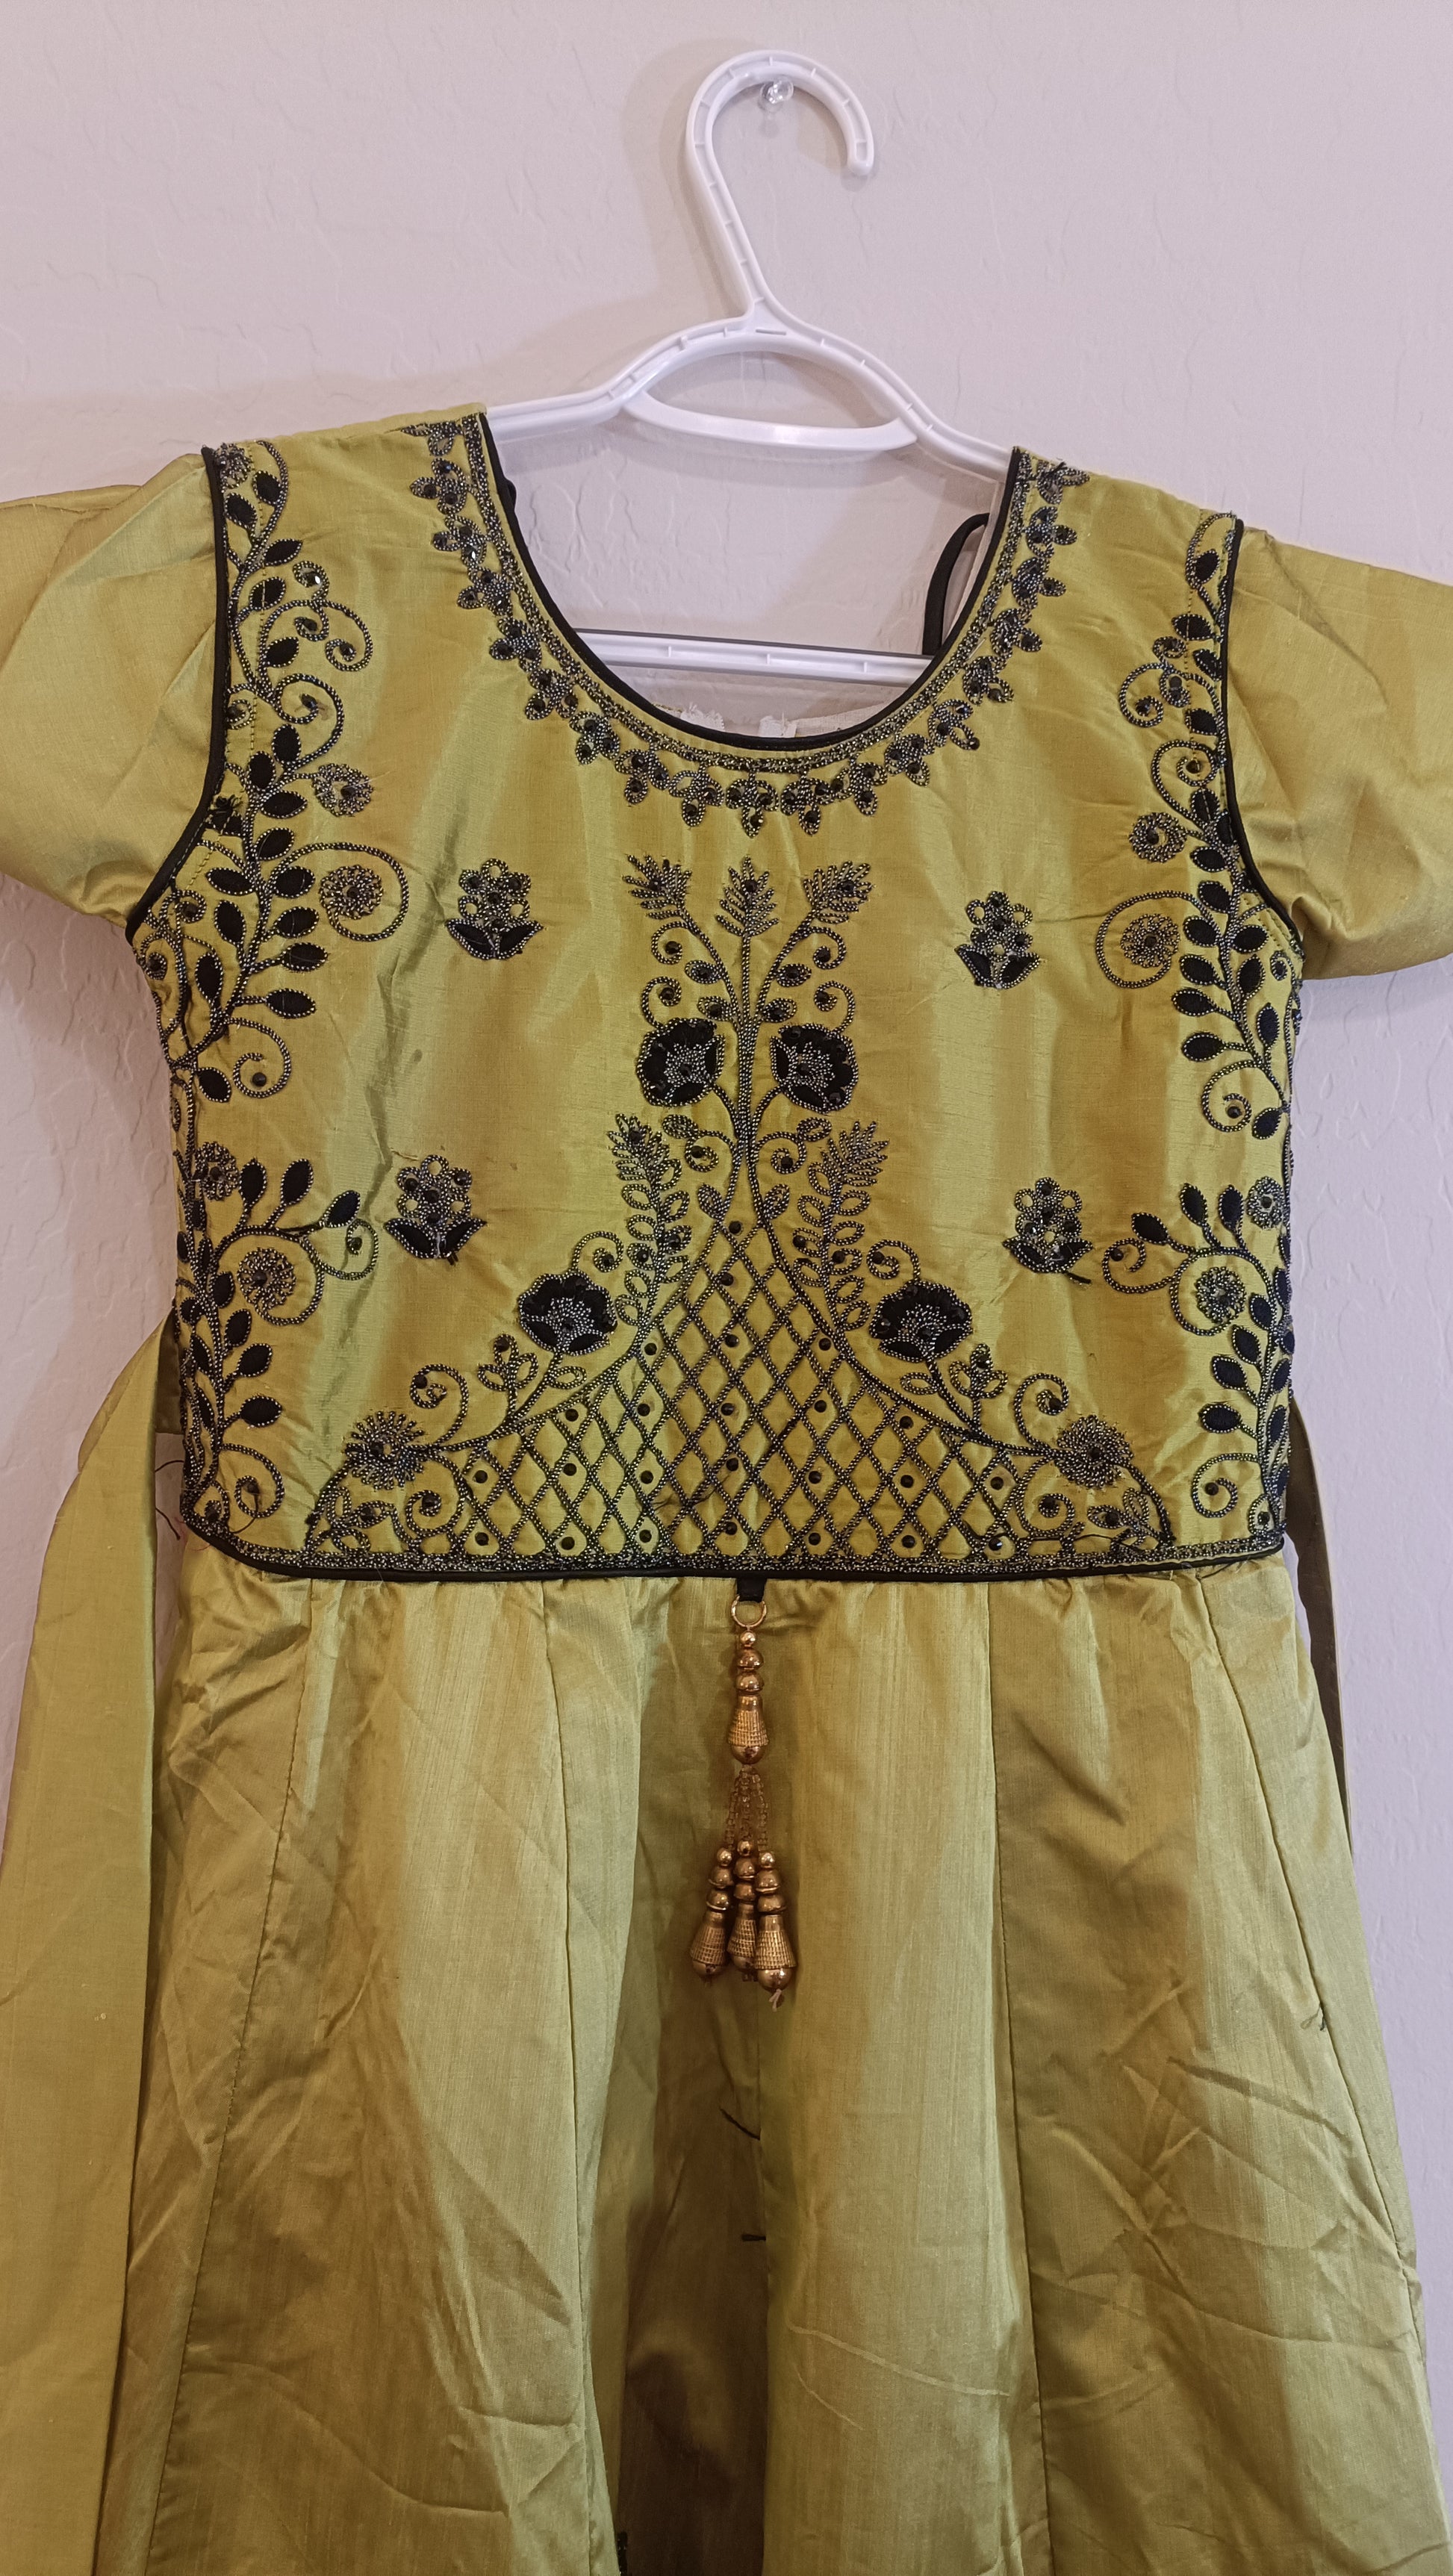 Pleasing Green Color Kurti For Girls In Chandler